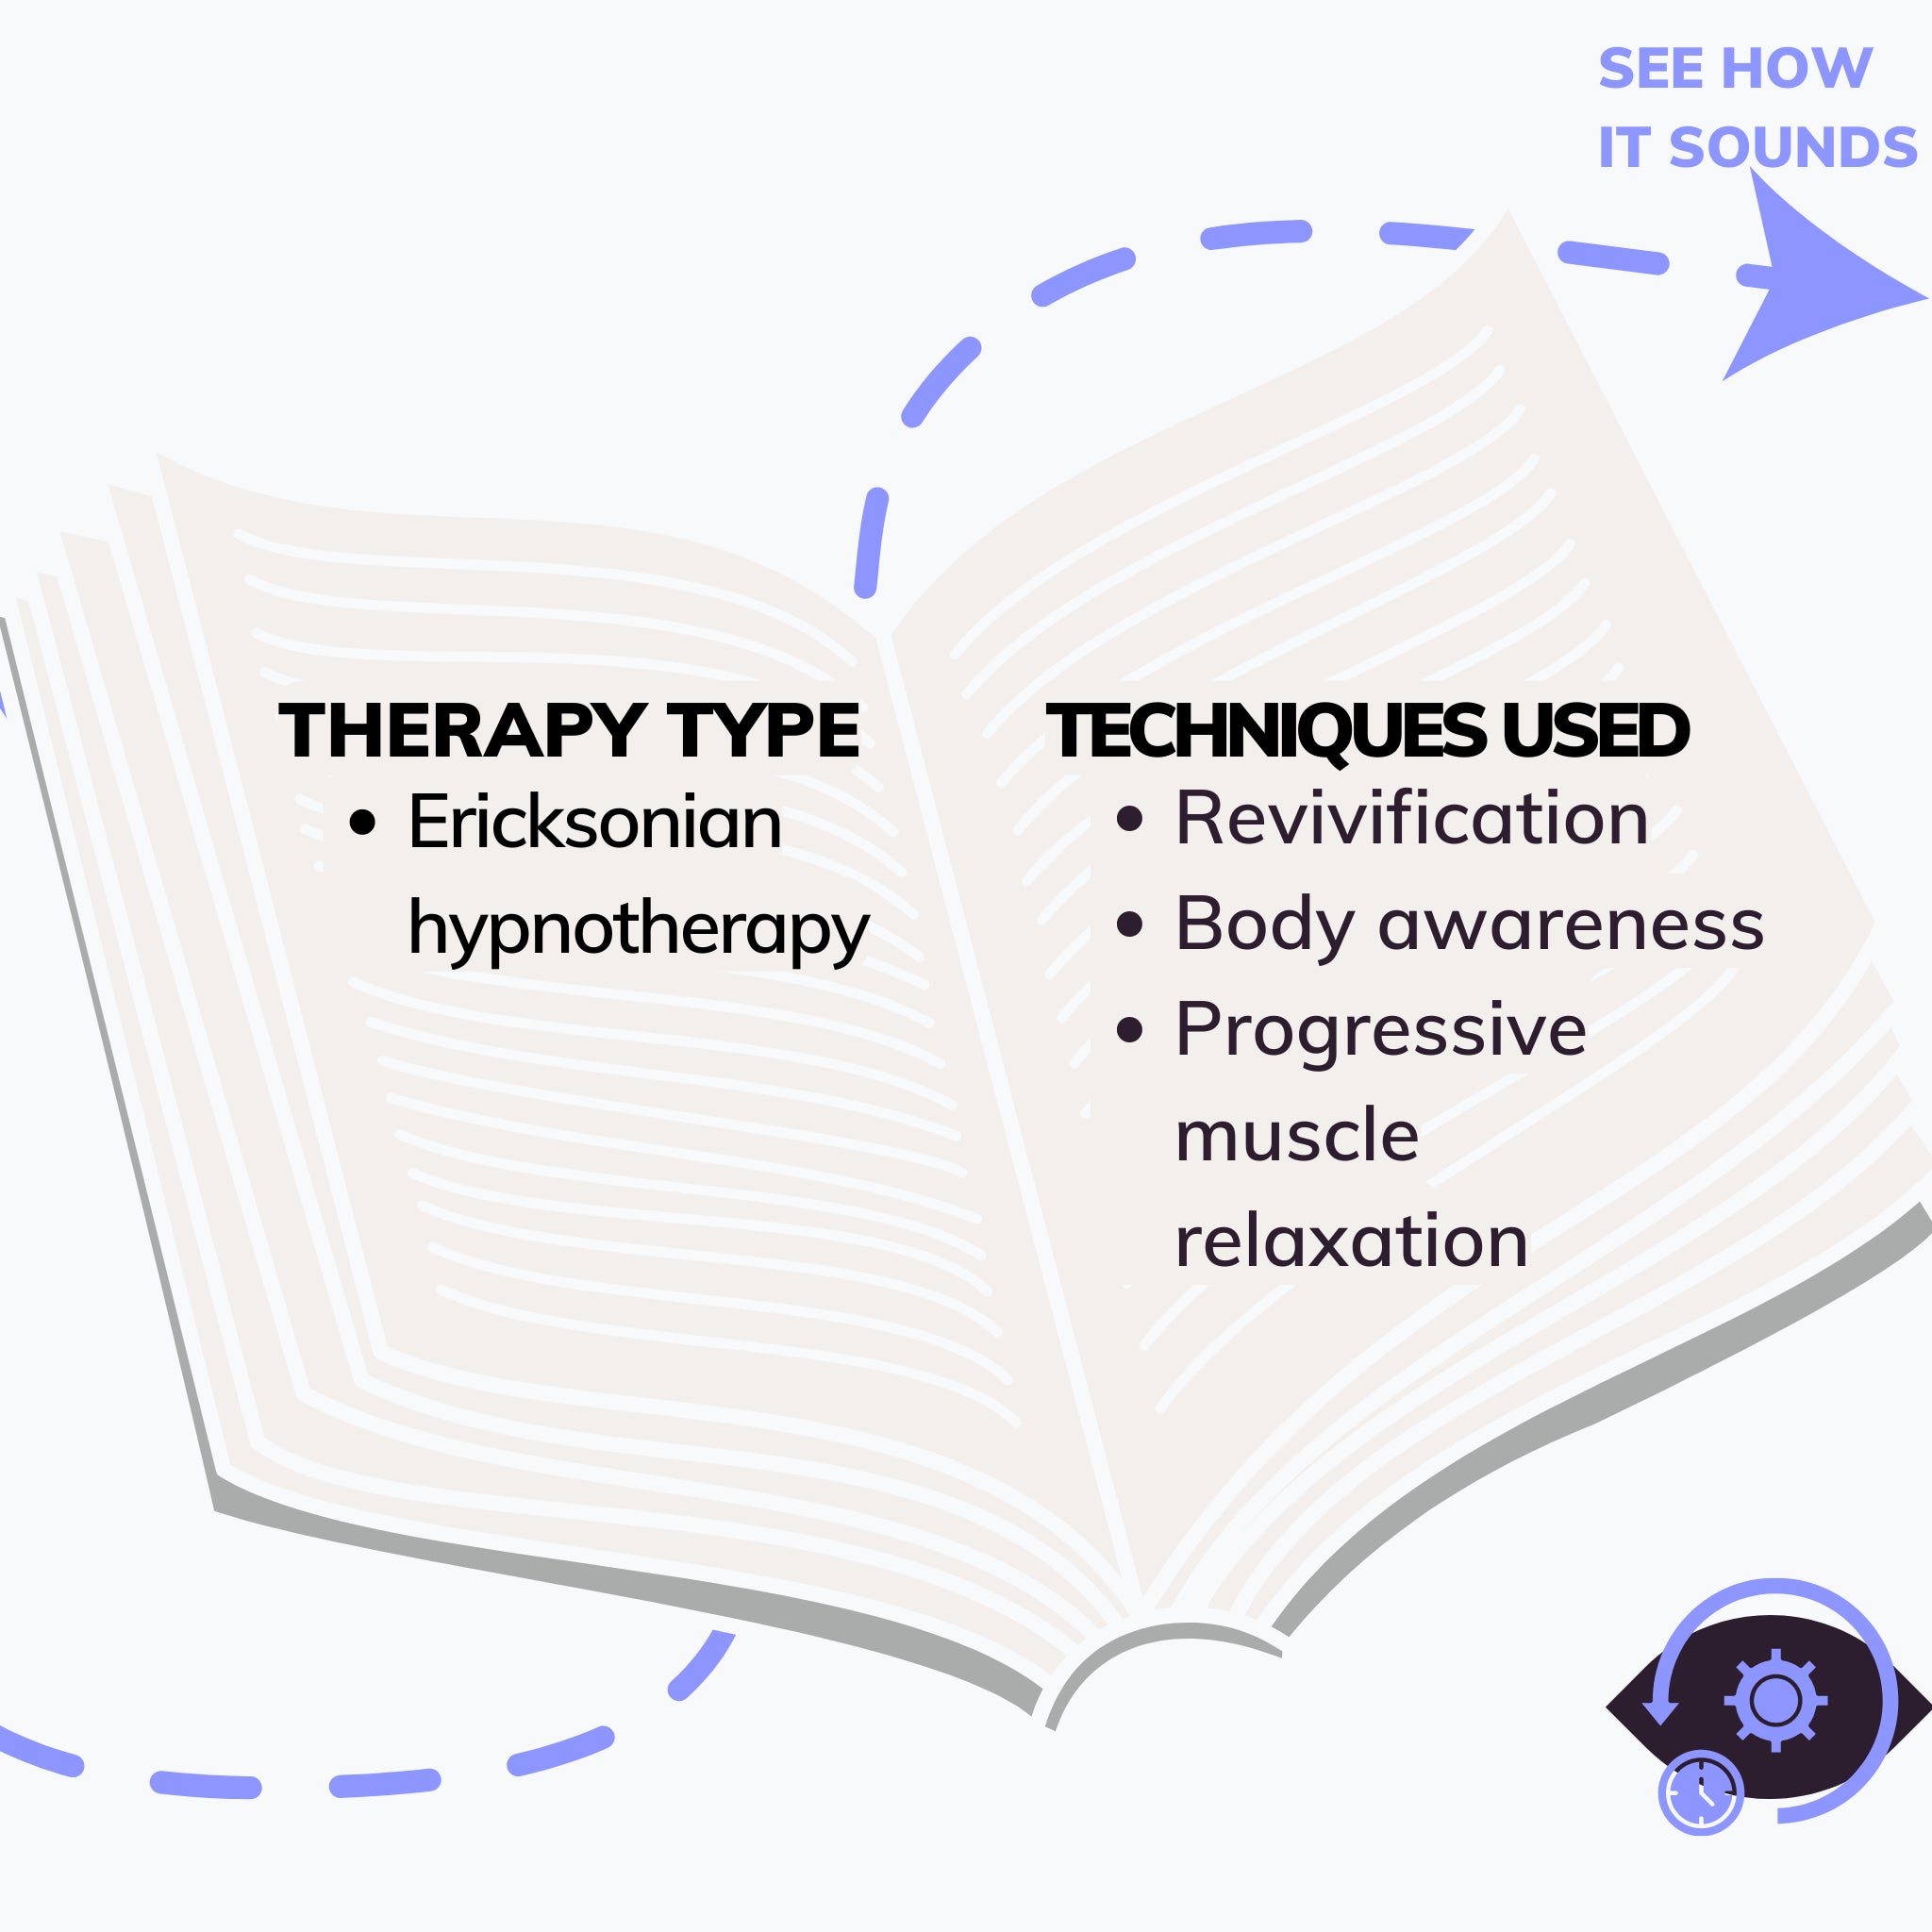 How it's made? Ericksonian hypnotherapy trance that contains techniques for revivification, body awareness and progressive muscle relaxation.